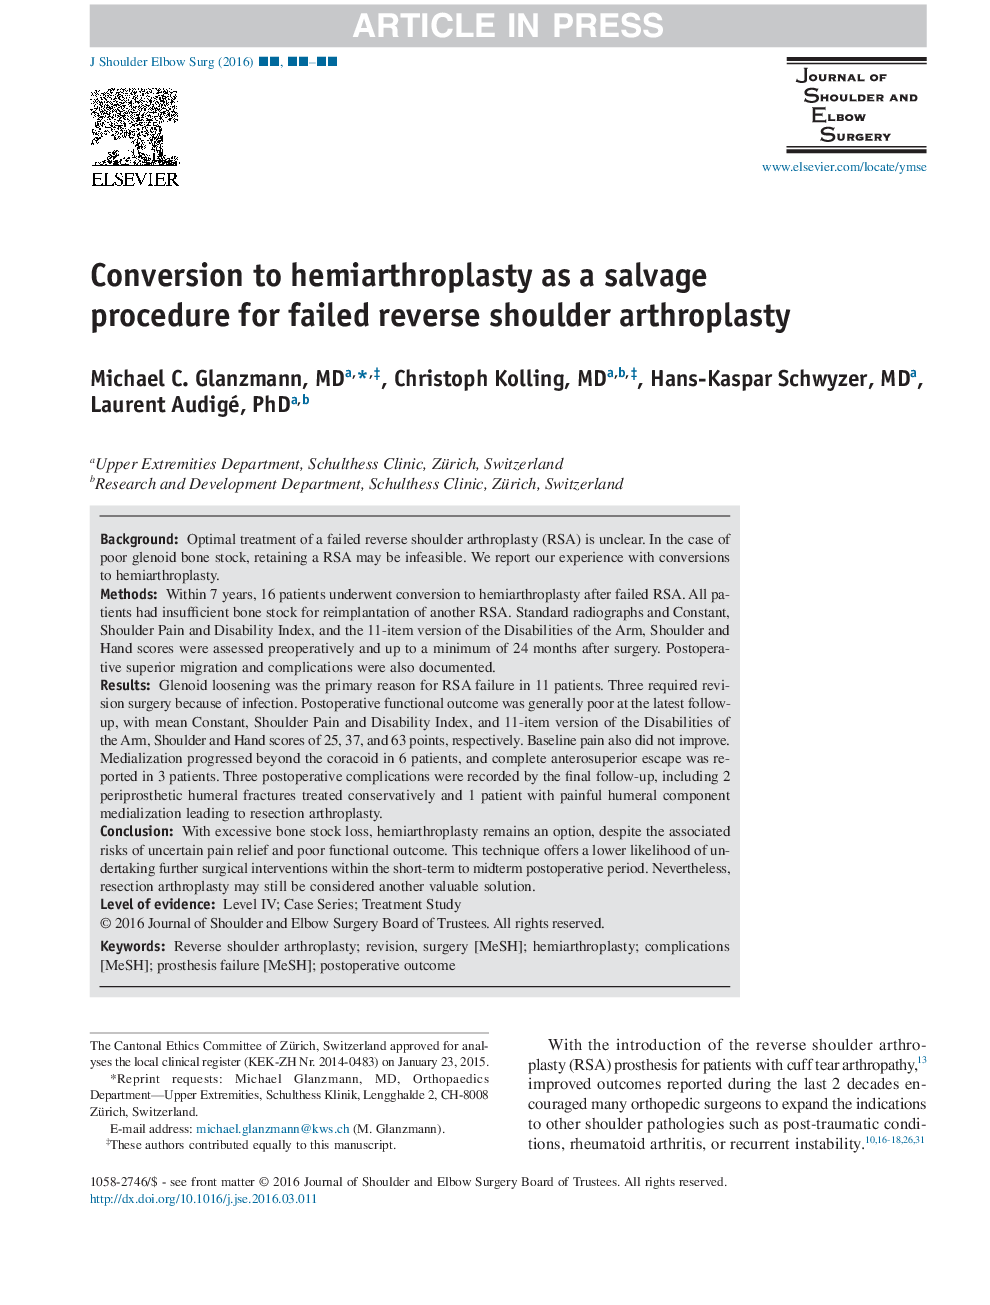 Conversion to hemiarthroplasty as a salvage procedure for failed reverse shoulder arthroplasty